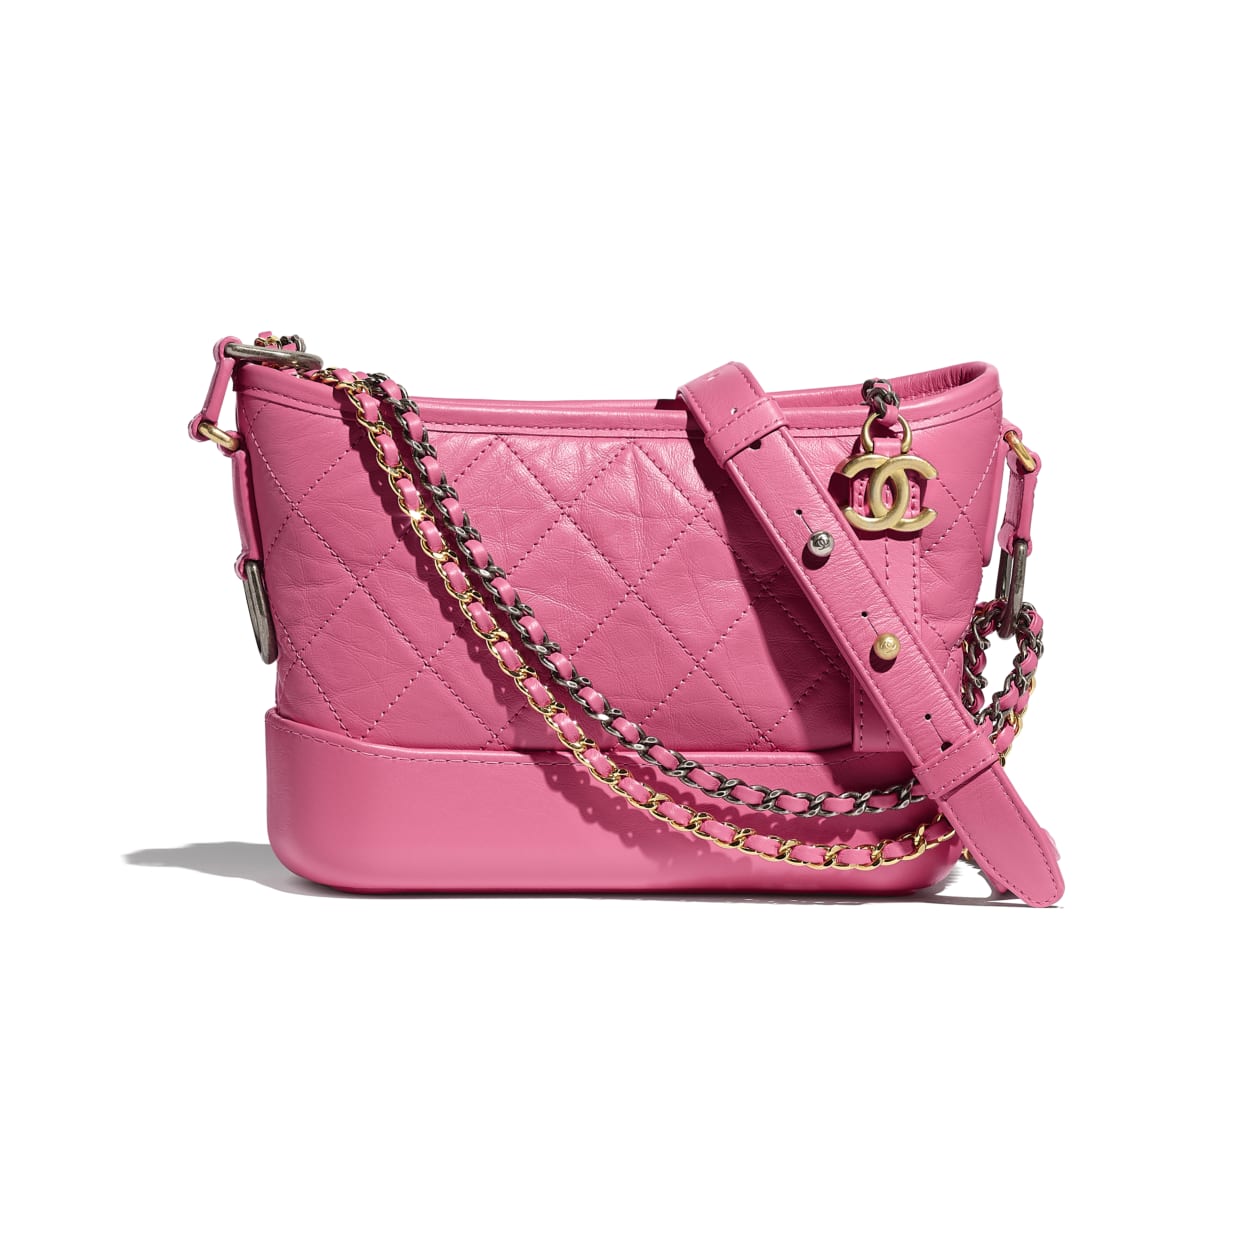 Canada Chanel Bag Price List Reference Guide | Spotted Fashion